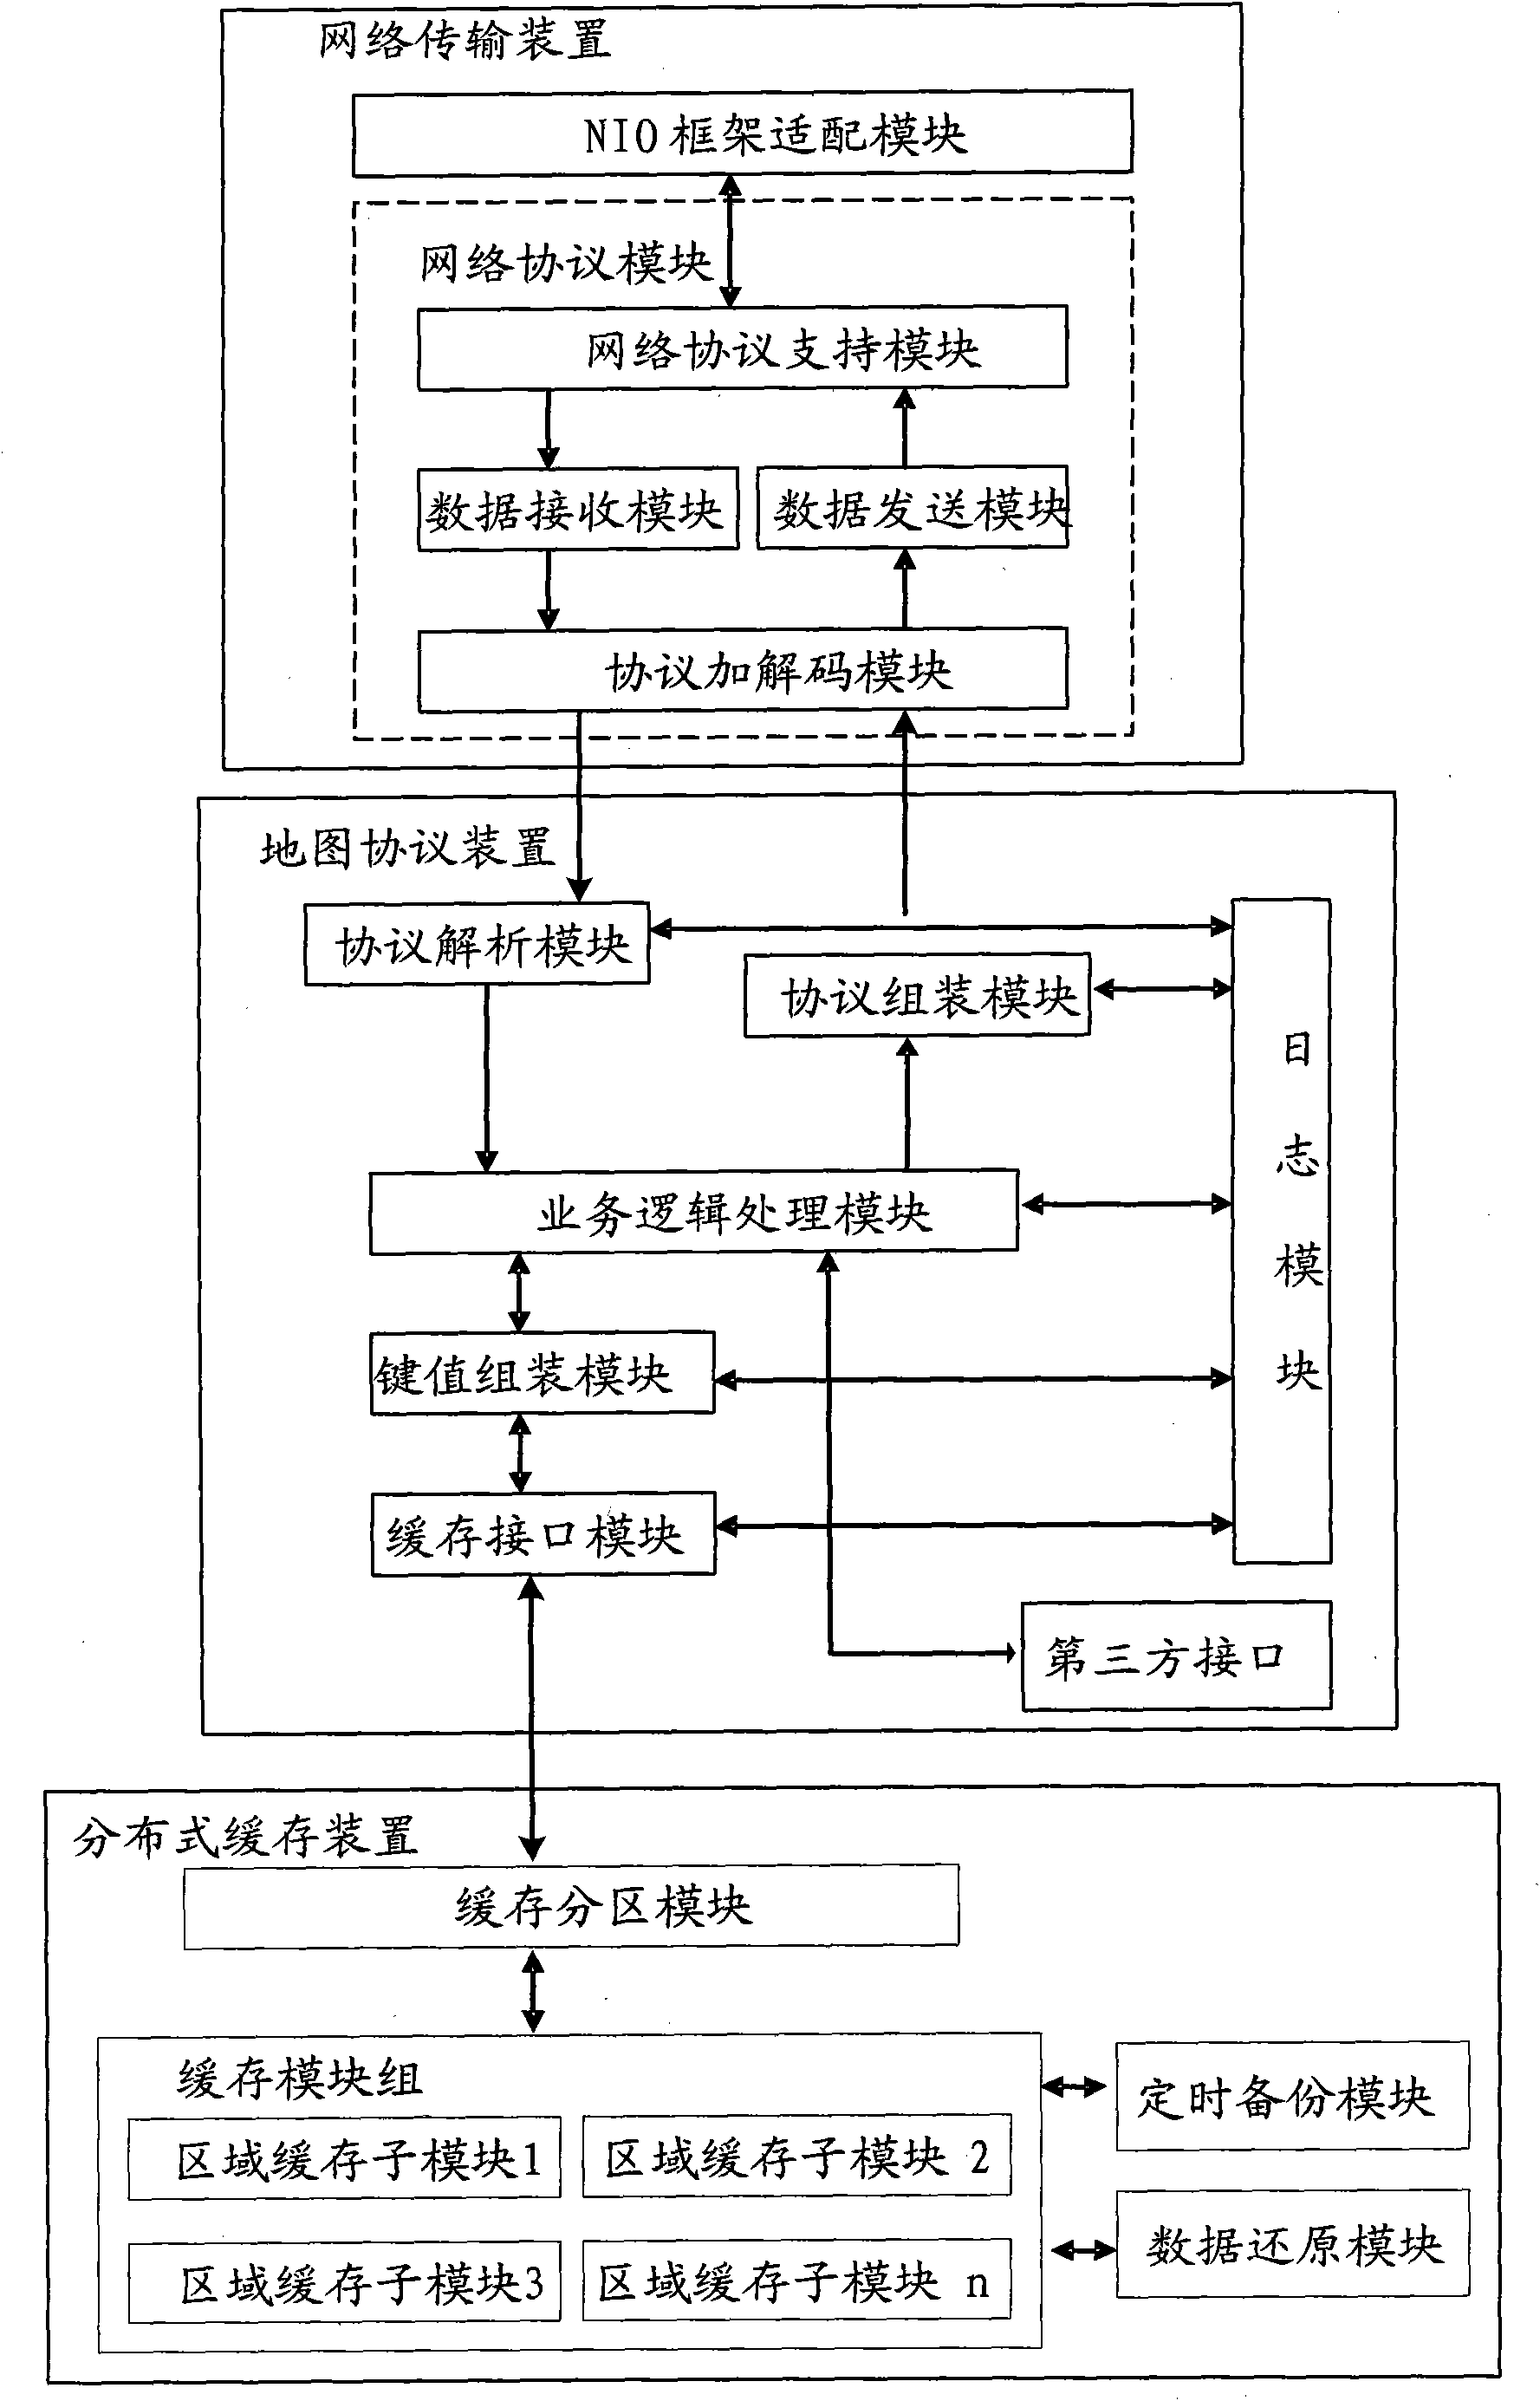 Geographical map displaying system and method